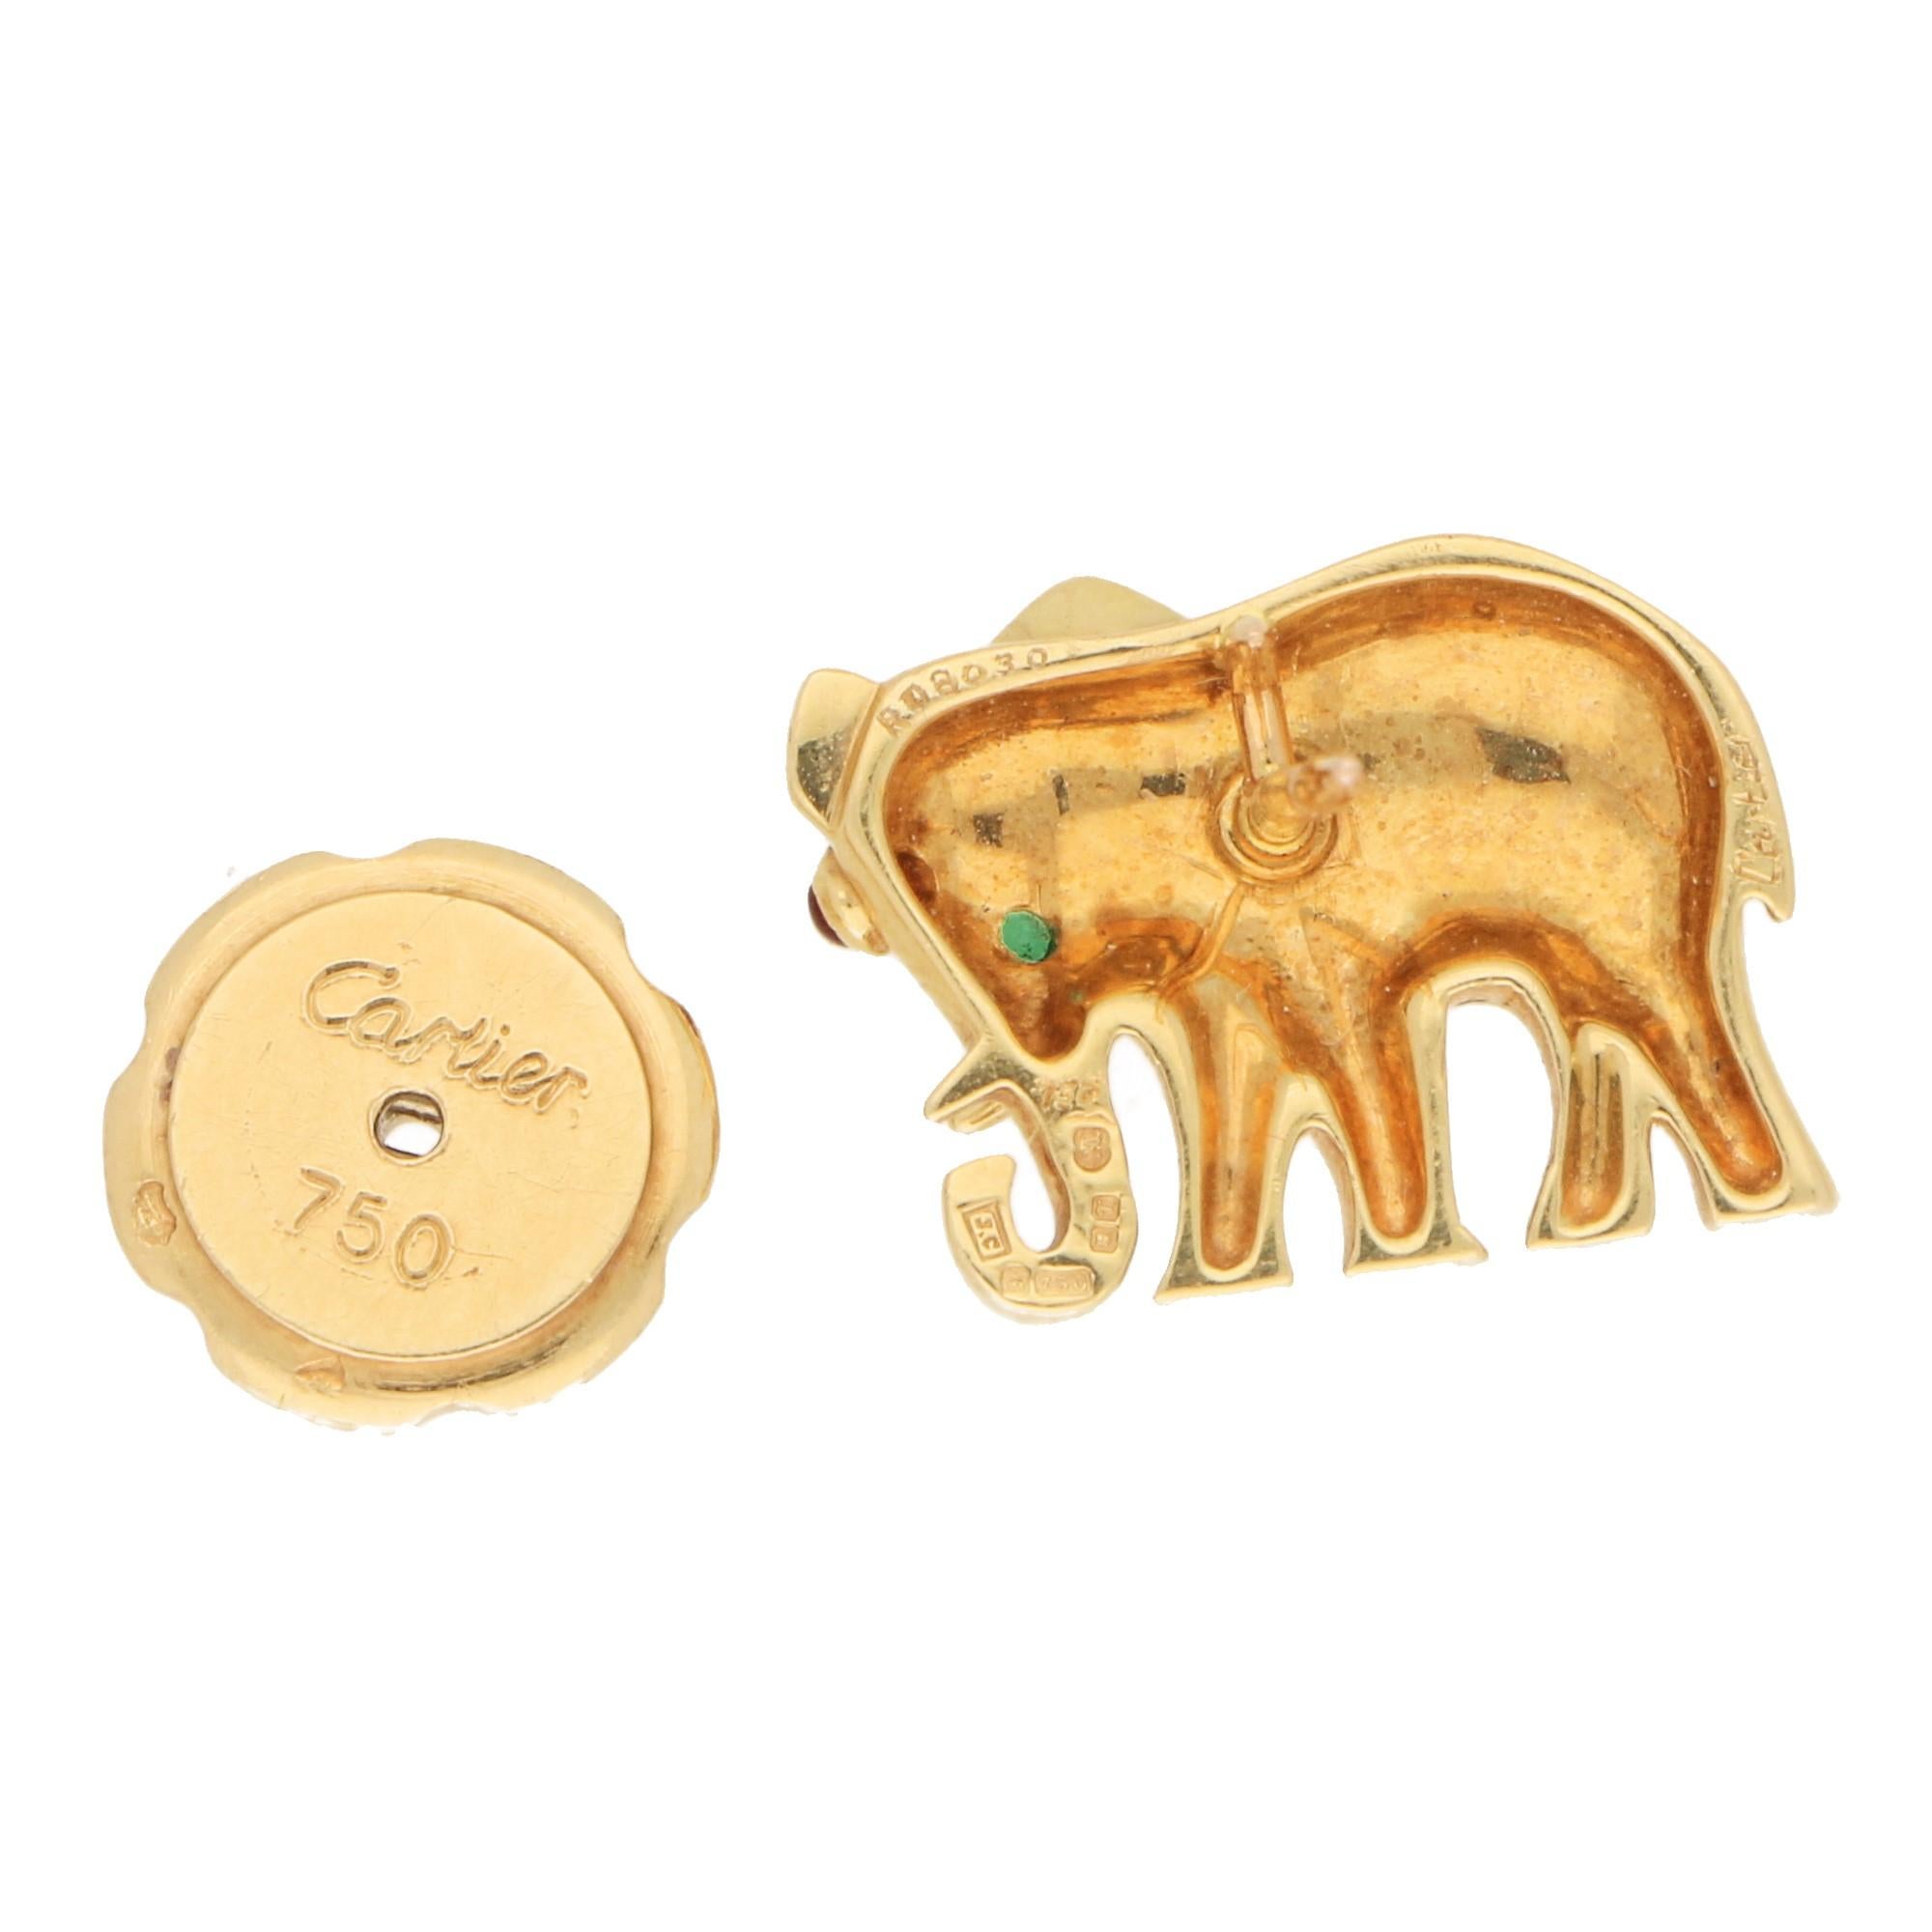 Cabochon Vintage Cartier Ruby and Emerald Elephant Pin Set in 18k Yellow Gold